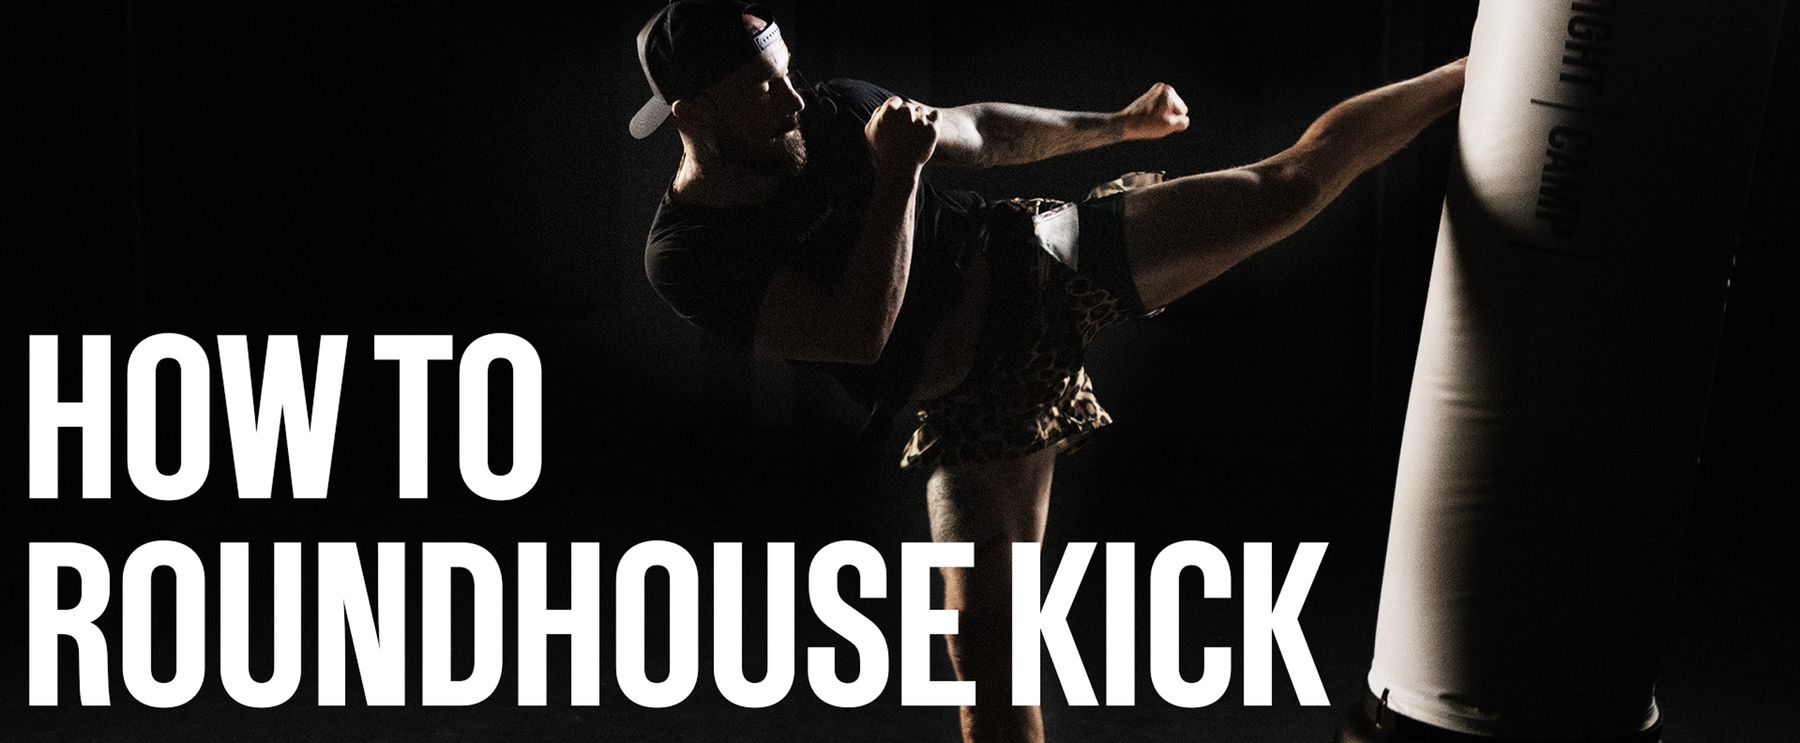 FightCamp - How to Do a Roundhouse Kick